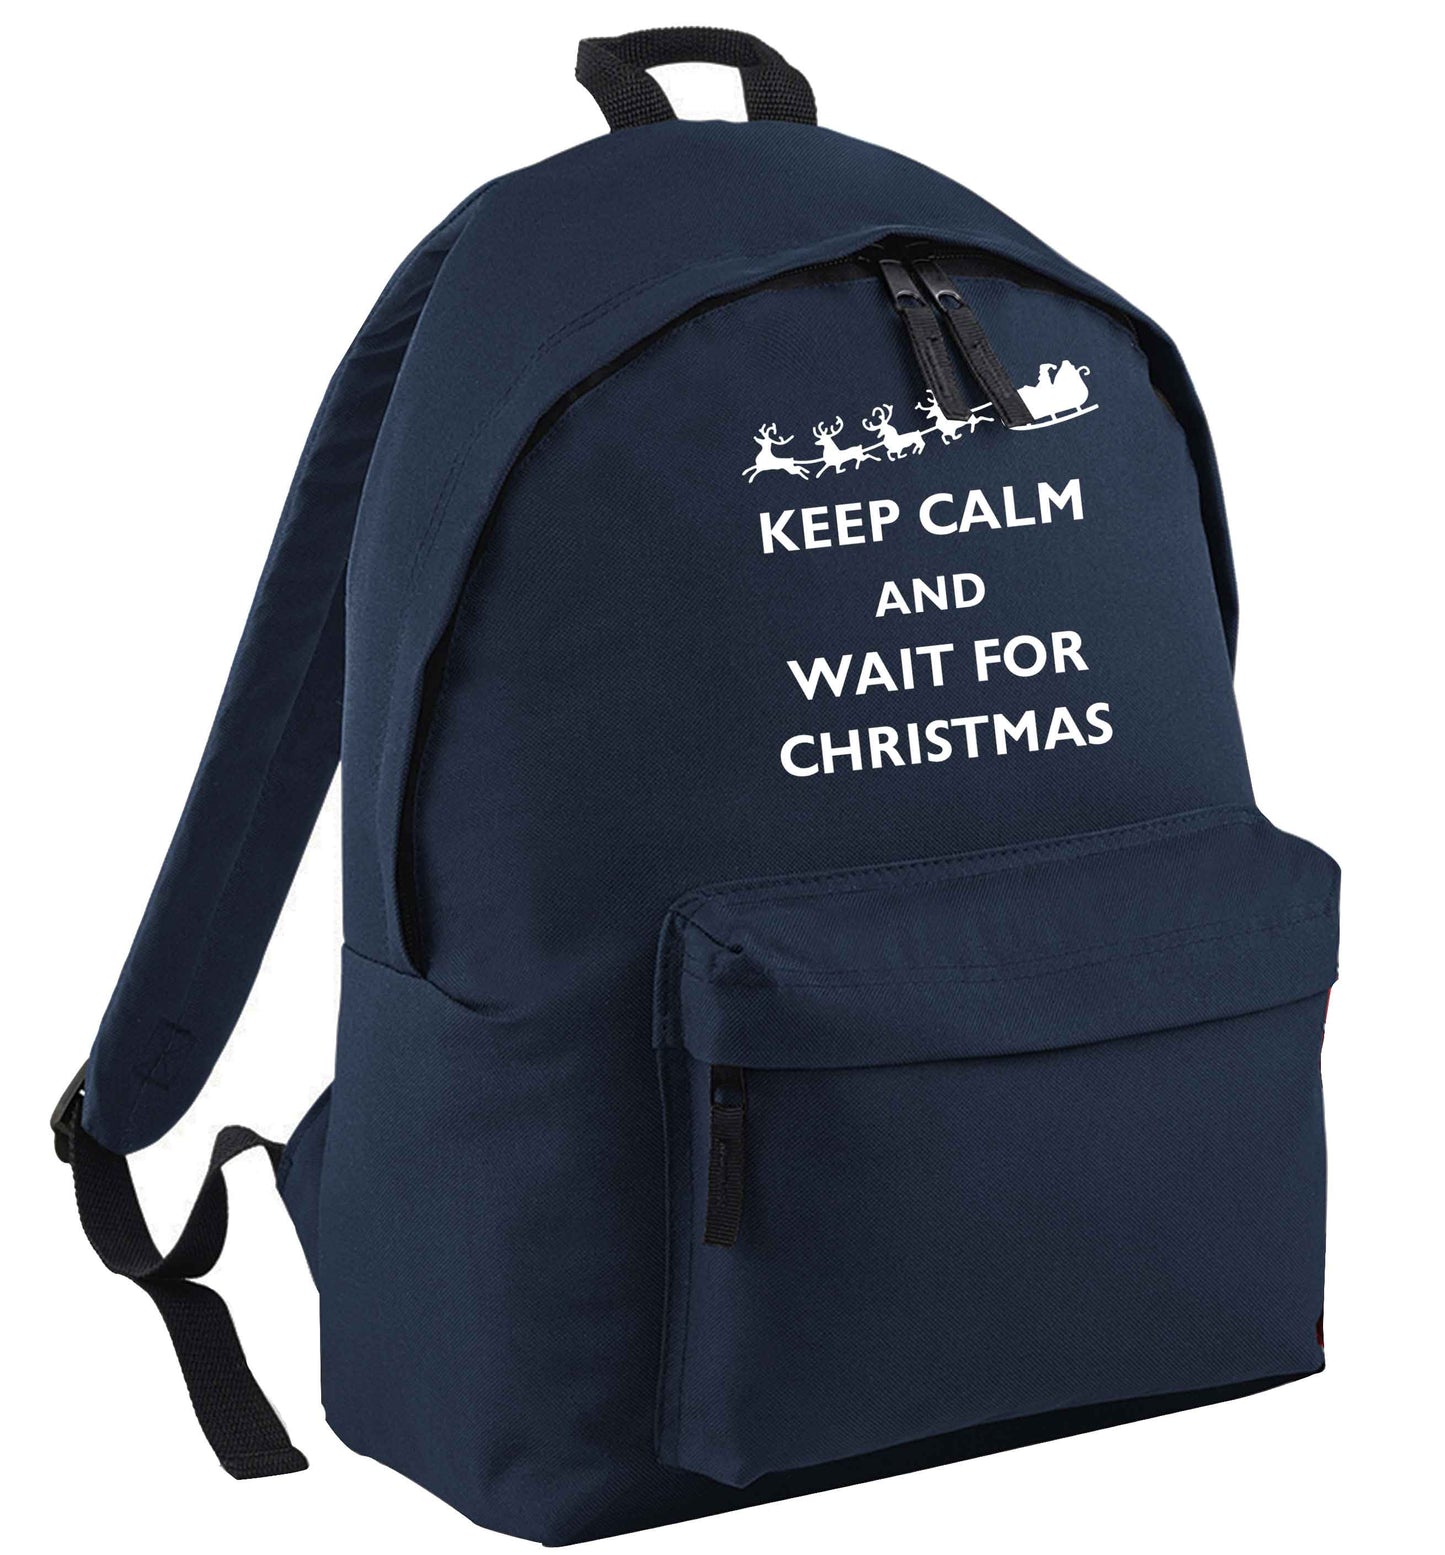 Keep calm and wait for Christmas navy adults backpack